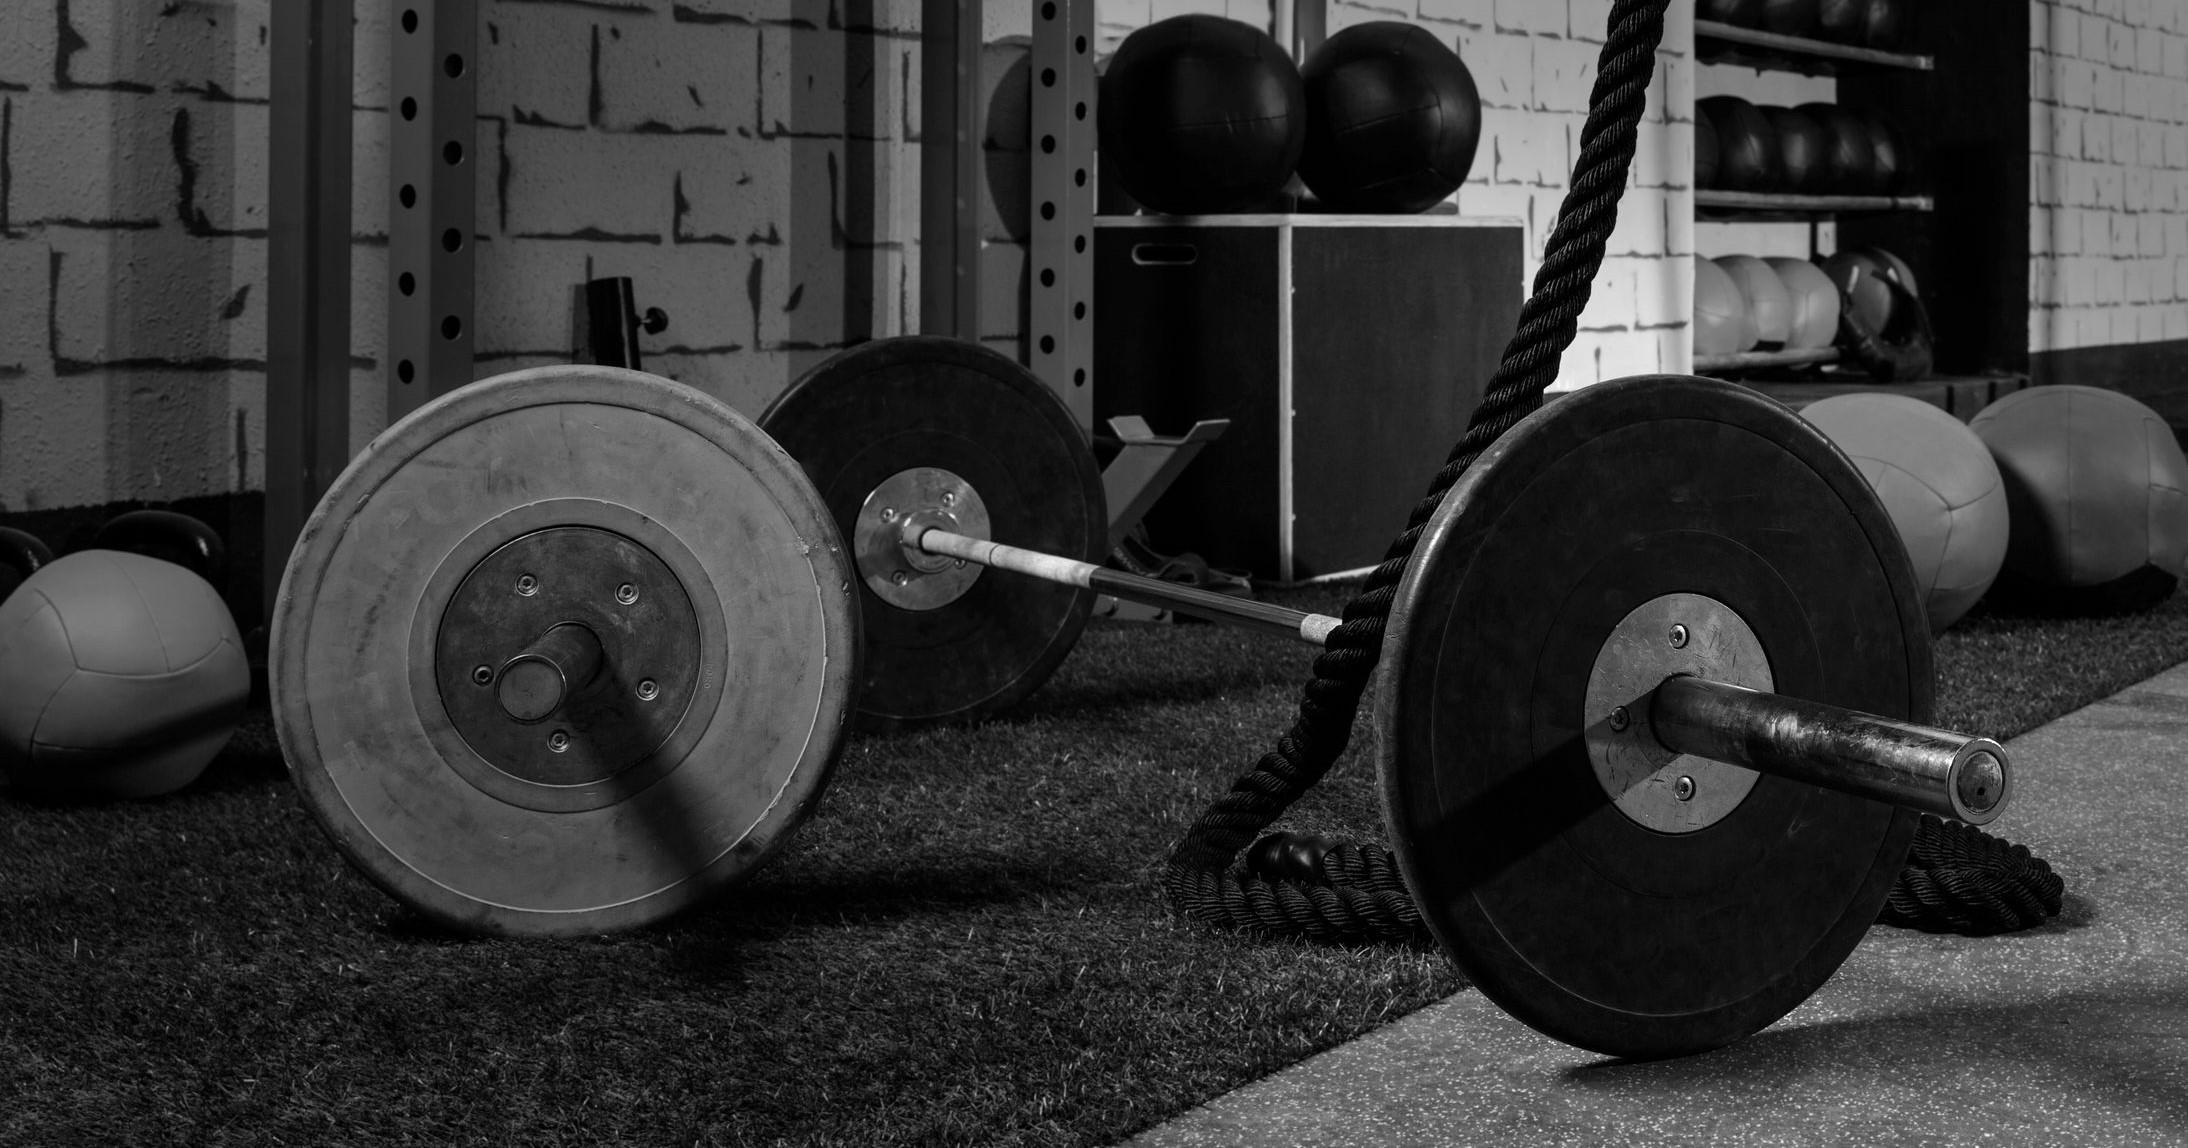 Barbells in a gym bar bells and rope